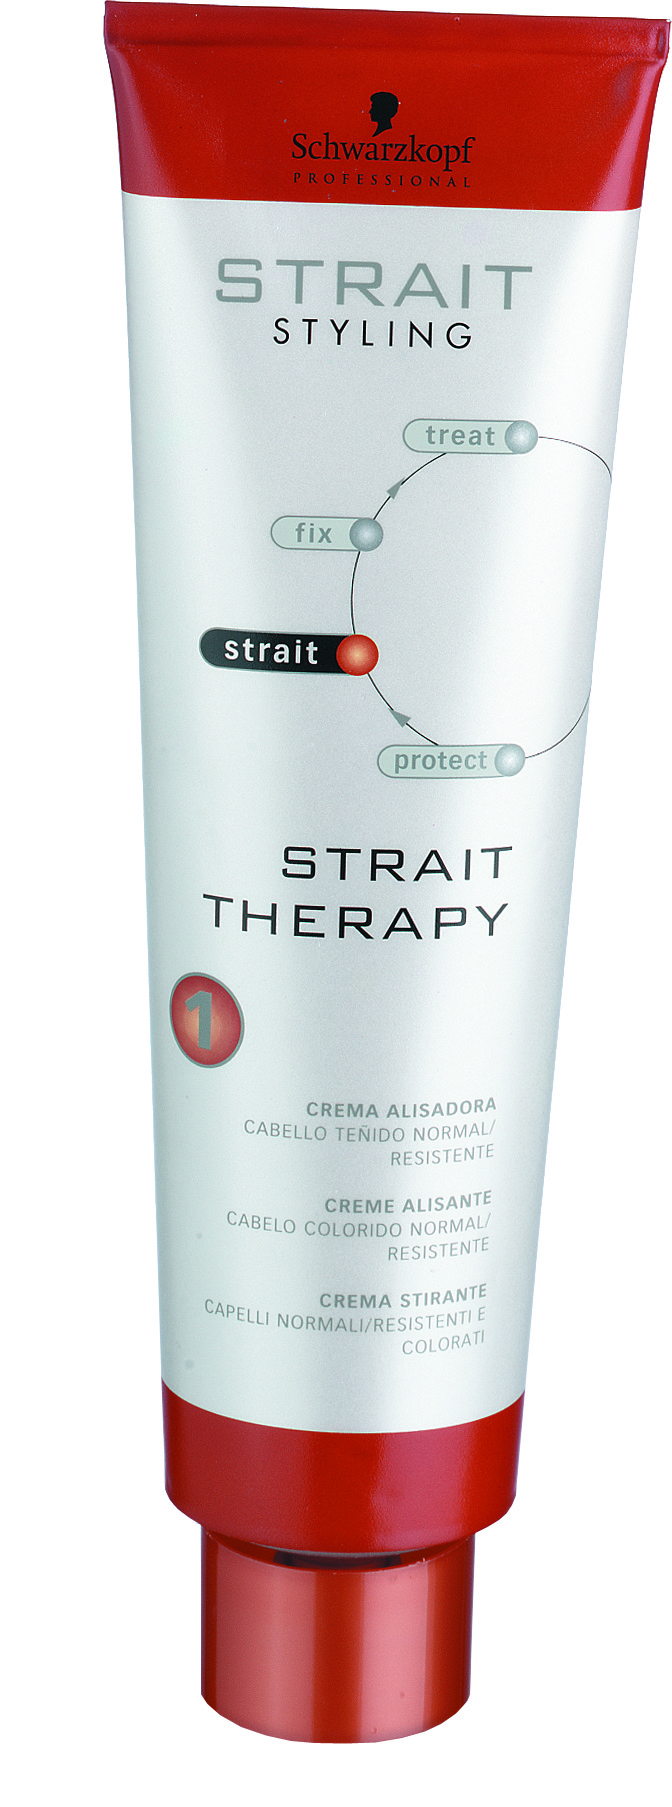 Strait Therapy, 300 ml